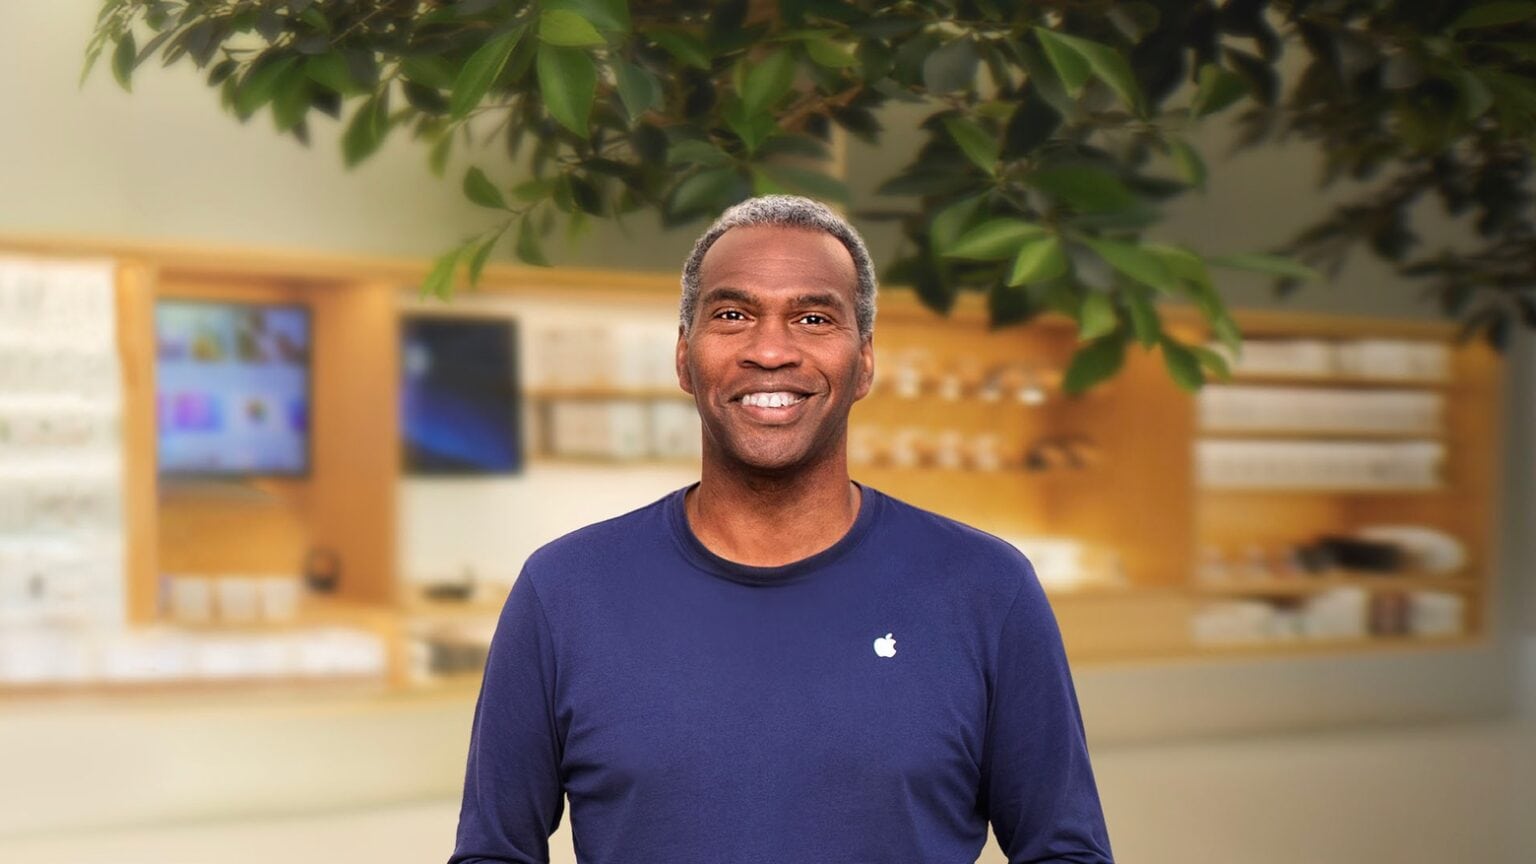 Like everyone else, Apple retail employees are being asked to work online.